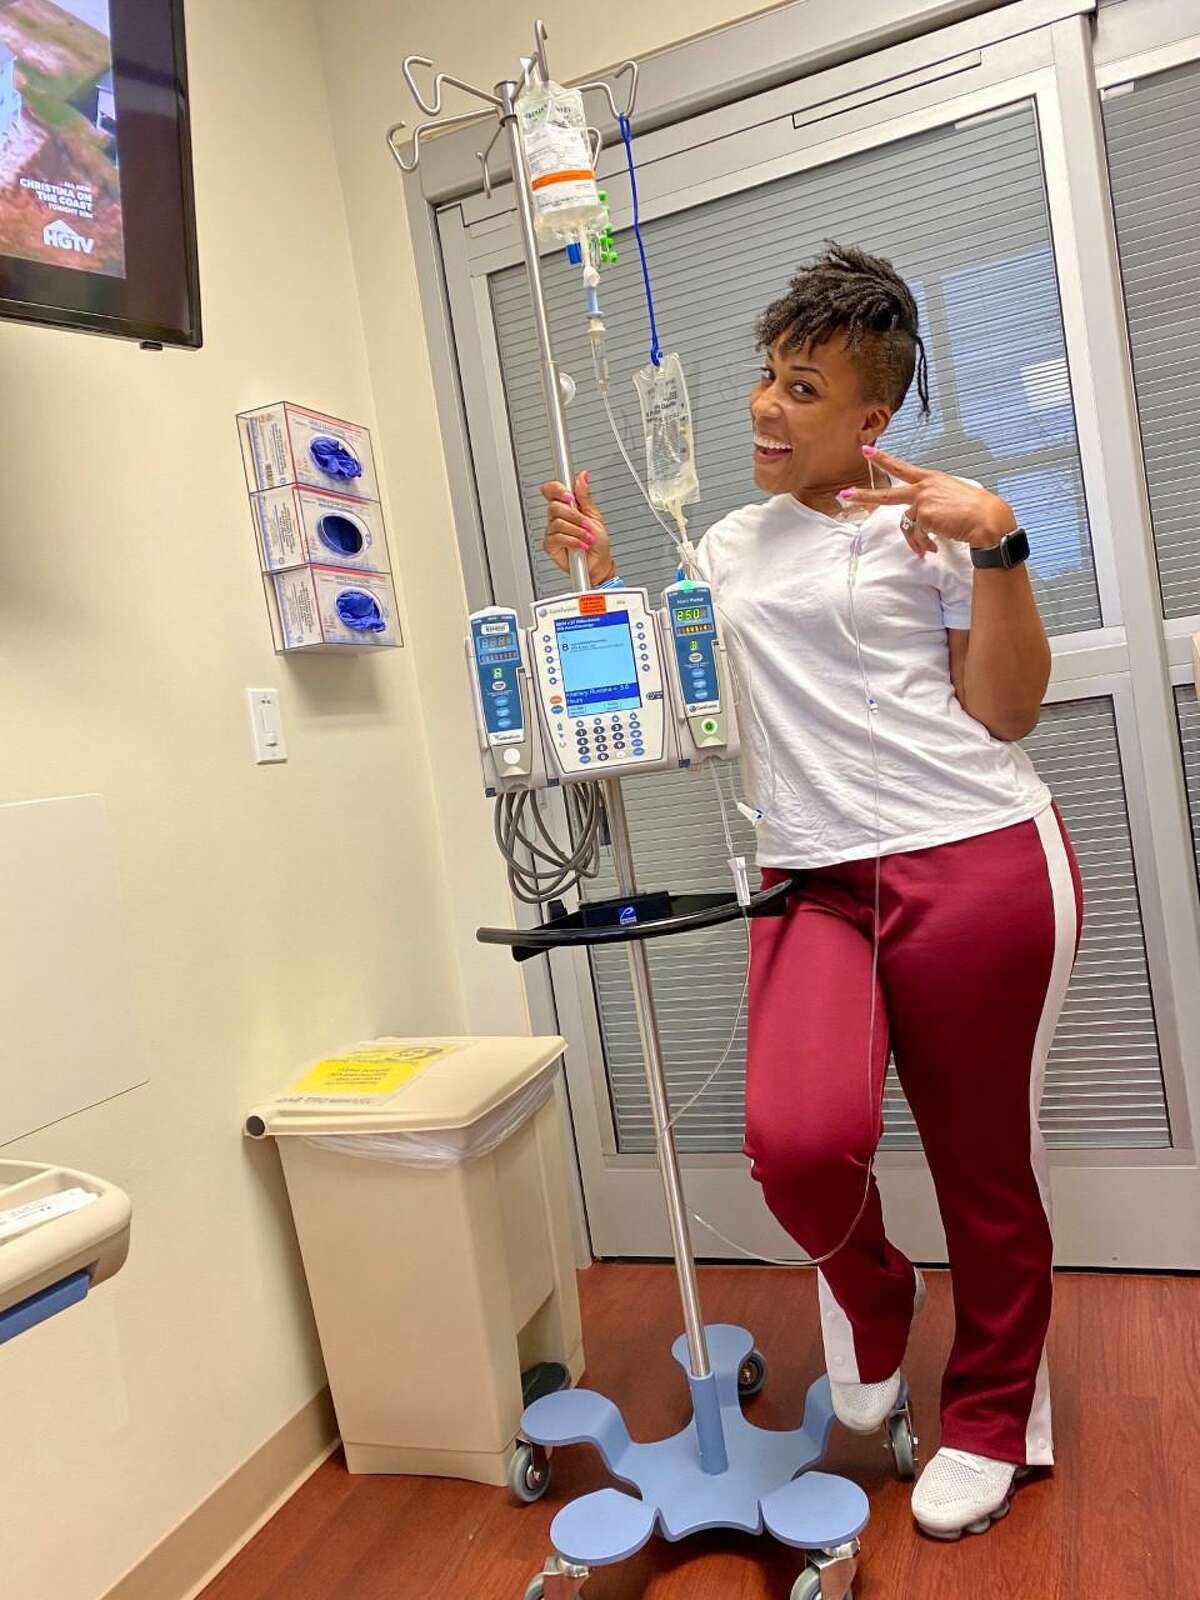 Tova Parker of Spring was diagnosed at Houston Methodist Willowbrook Hospital with breast cancer at age 41. She was declared cancer free on Juneteenth.